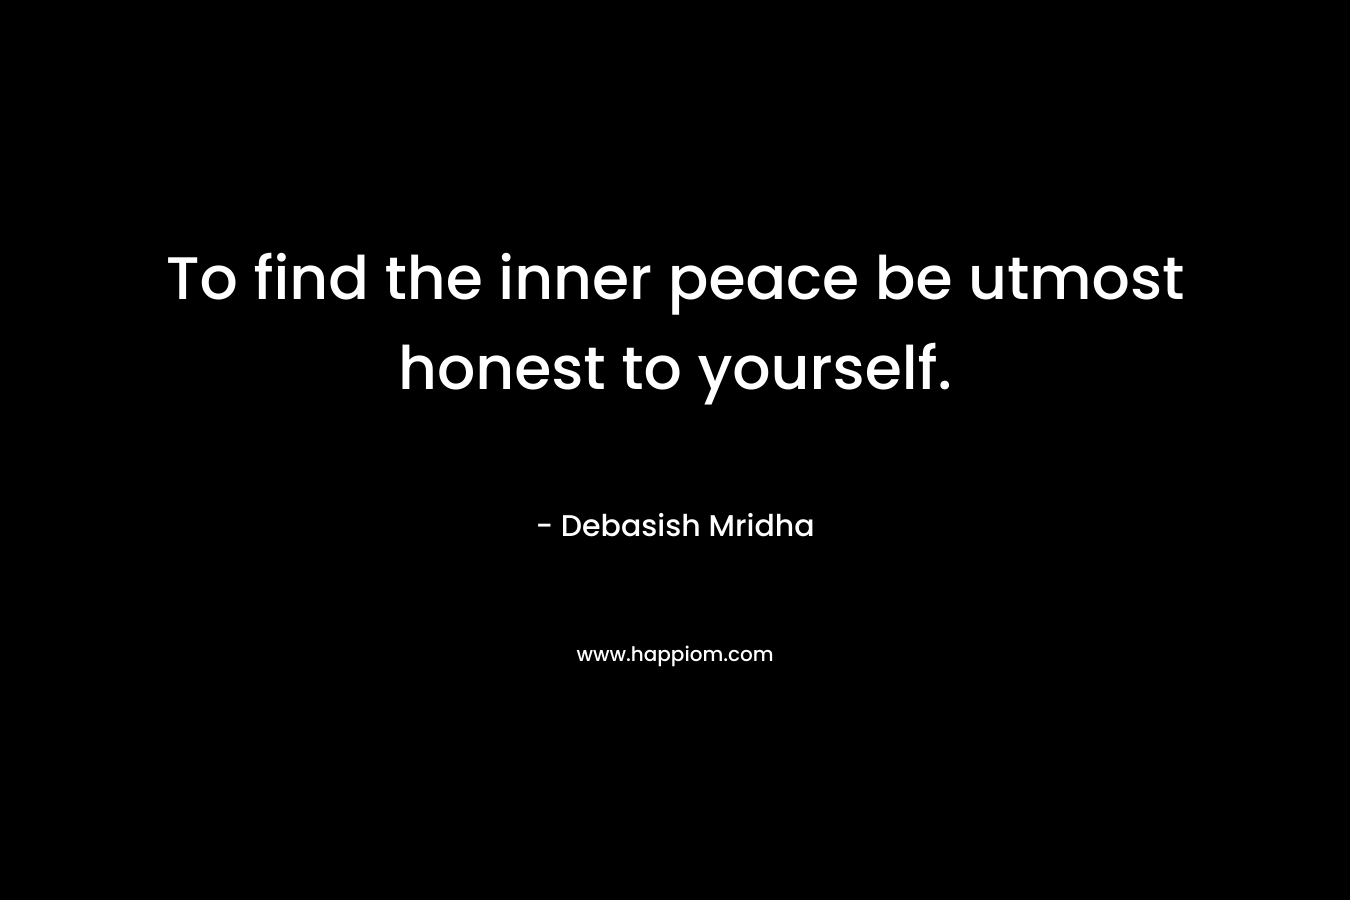 To find the inner peace be utmost honest to yourself.